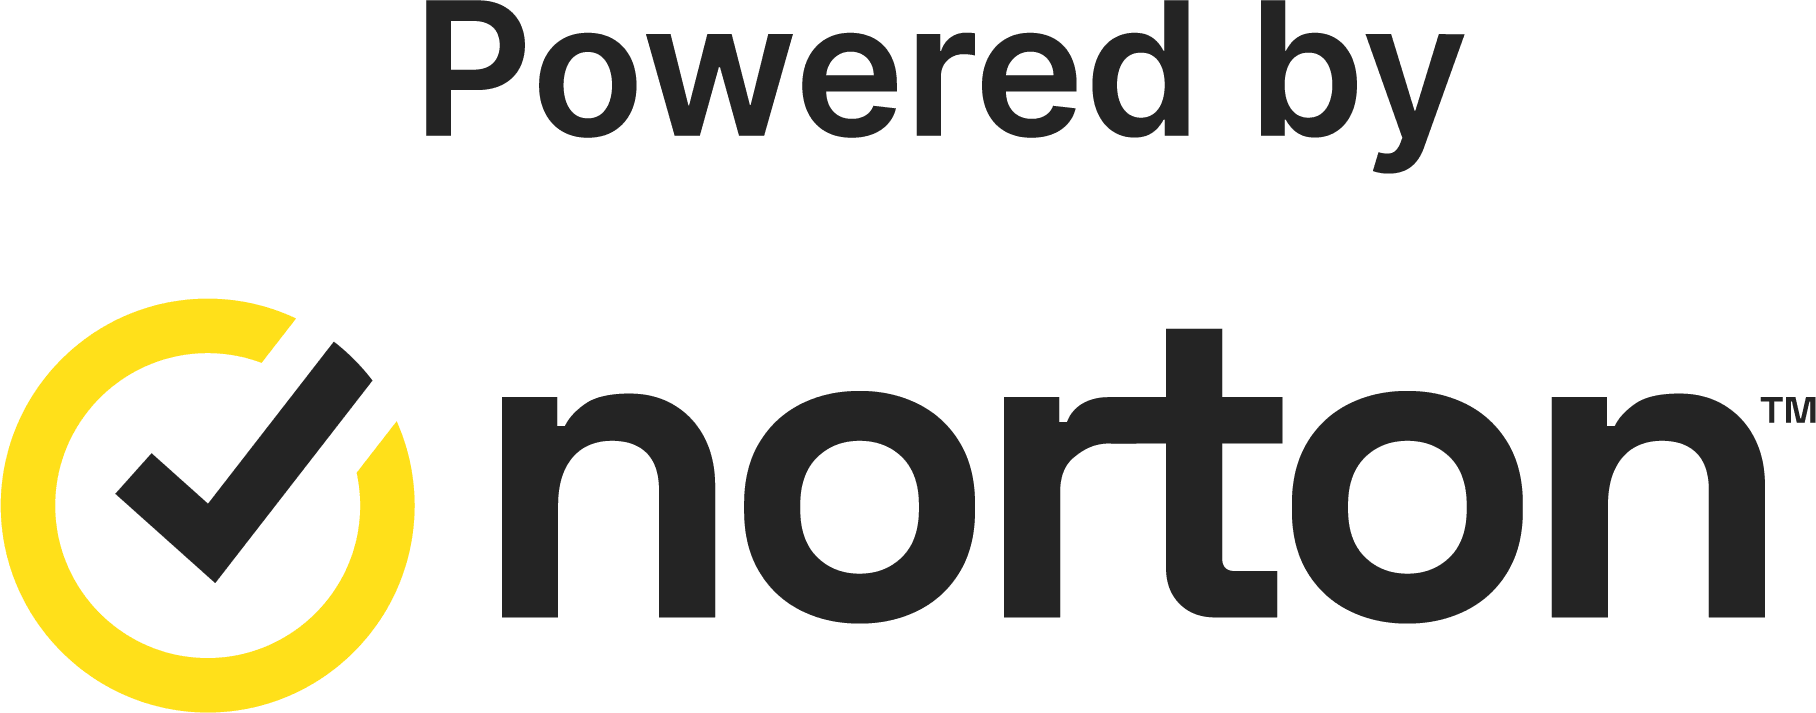 powered by norton